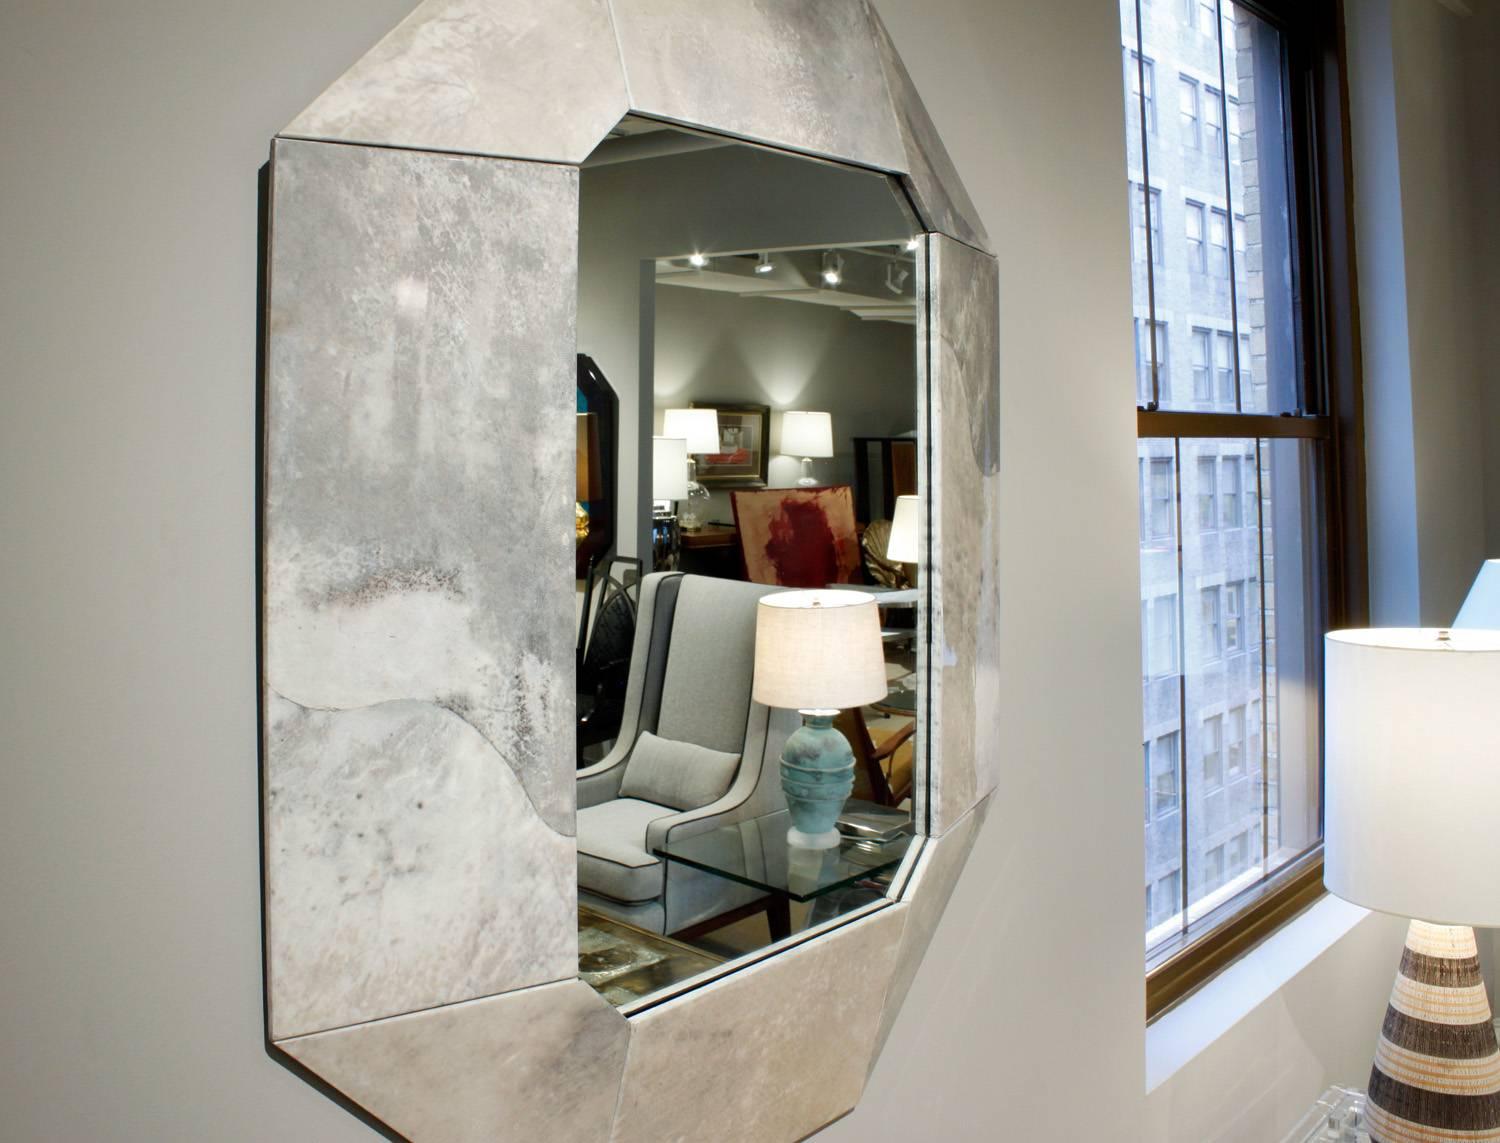 Large wall-hanging mirror with frame in lacquered goatskin by Karl Springer, American, 1988. This is a wonderful example of Springer's designs.